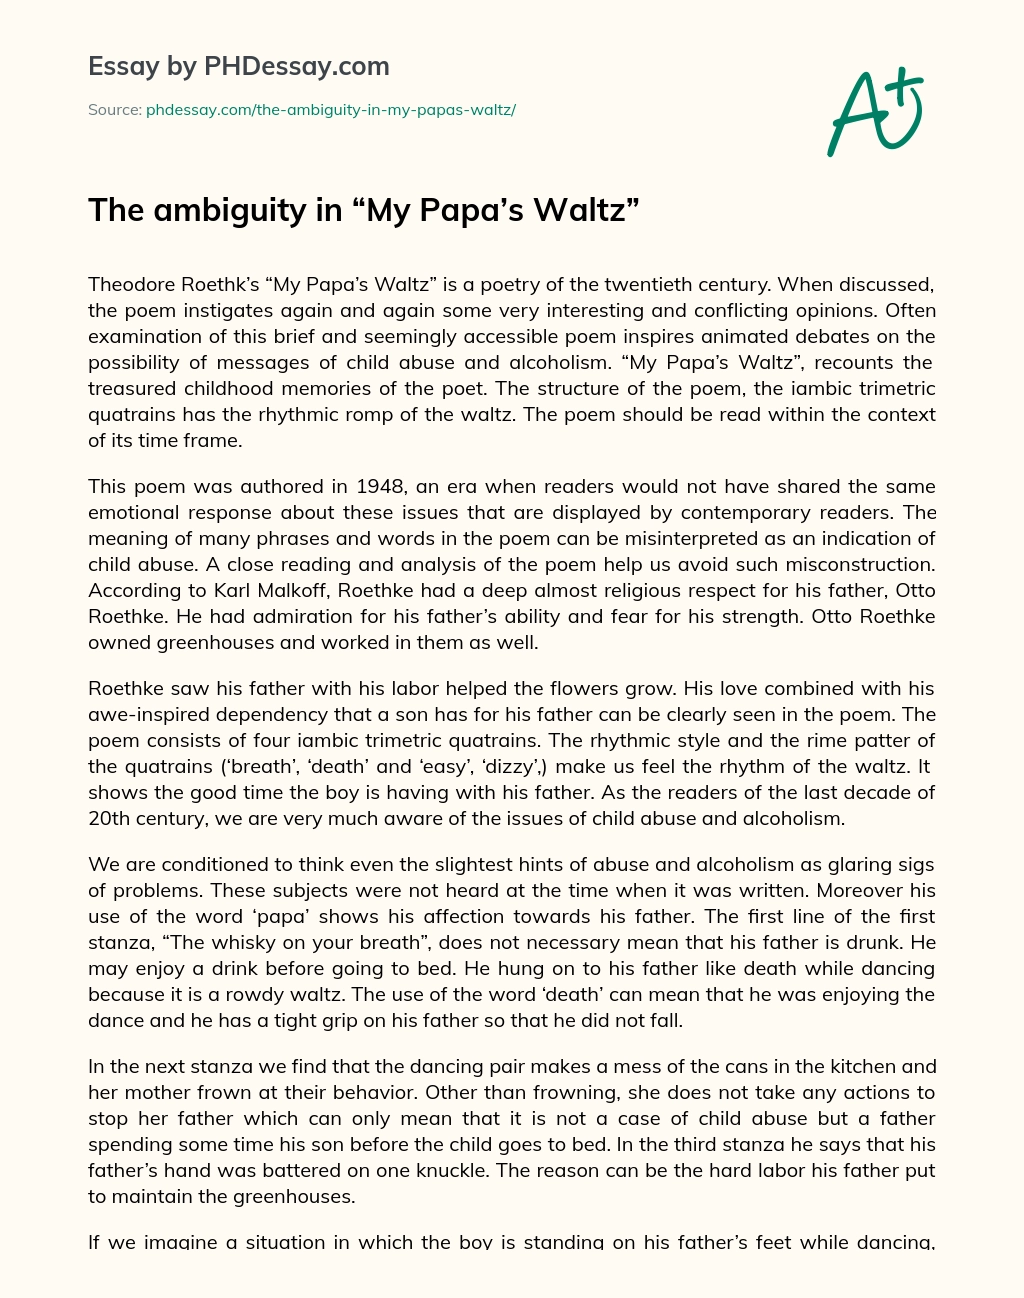 The ambiguity in “My Papa’s Waltz” essay